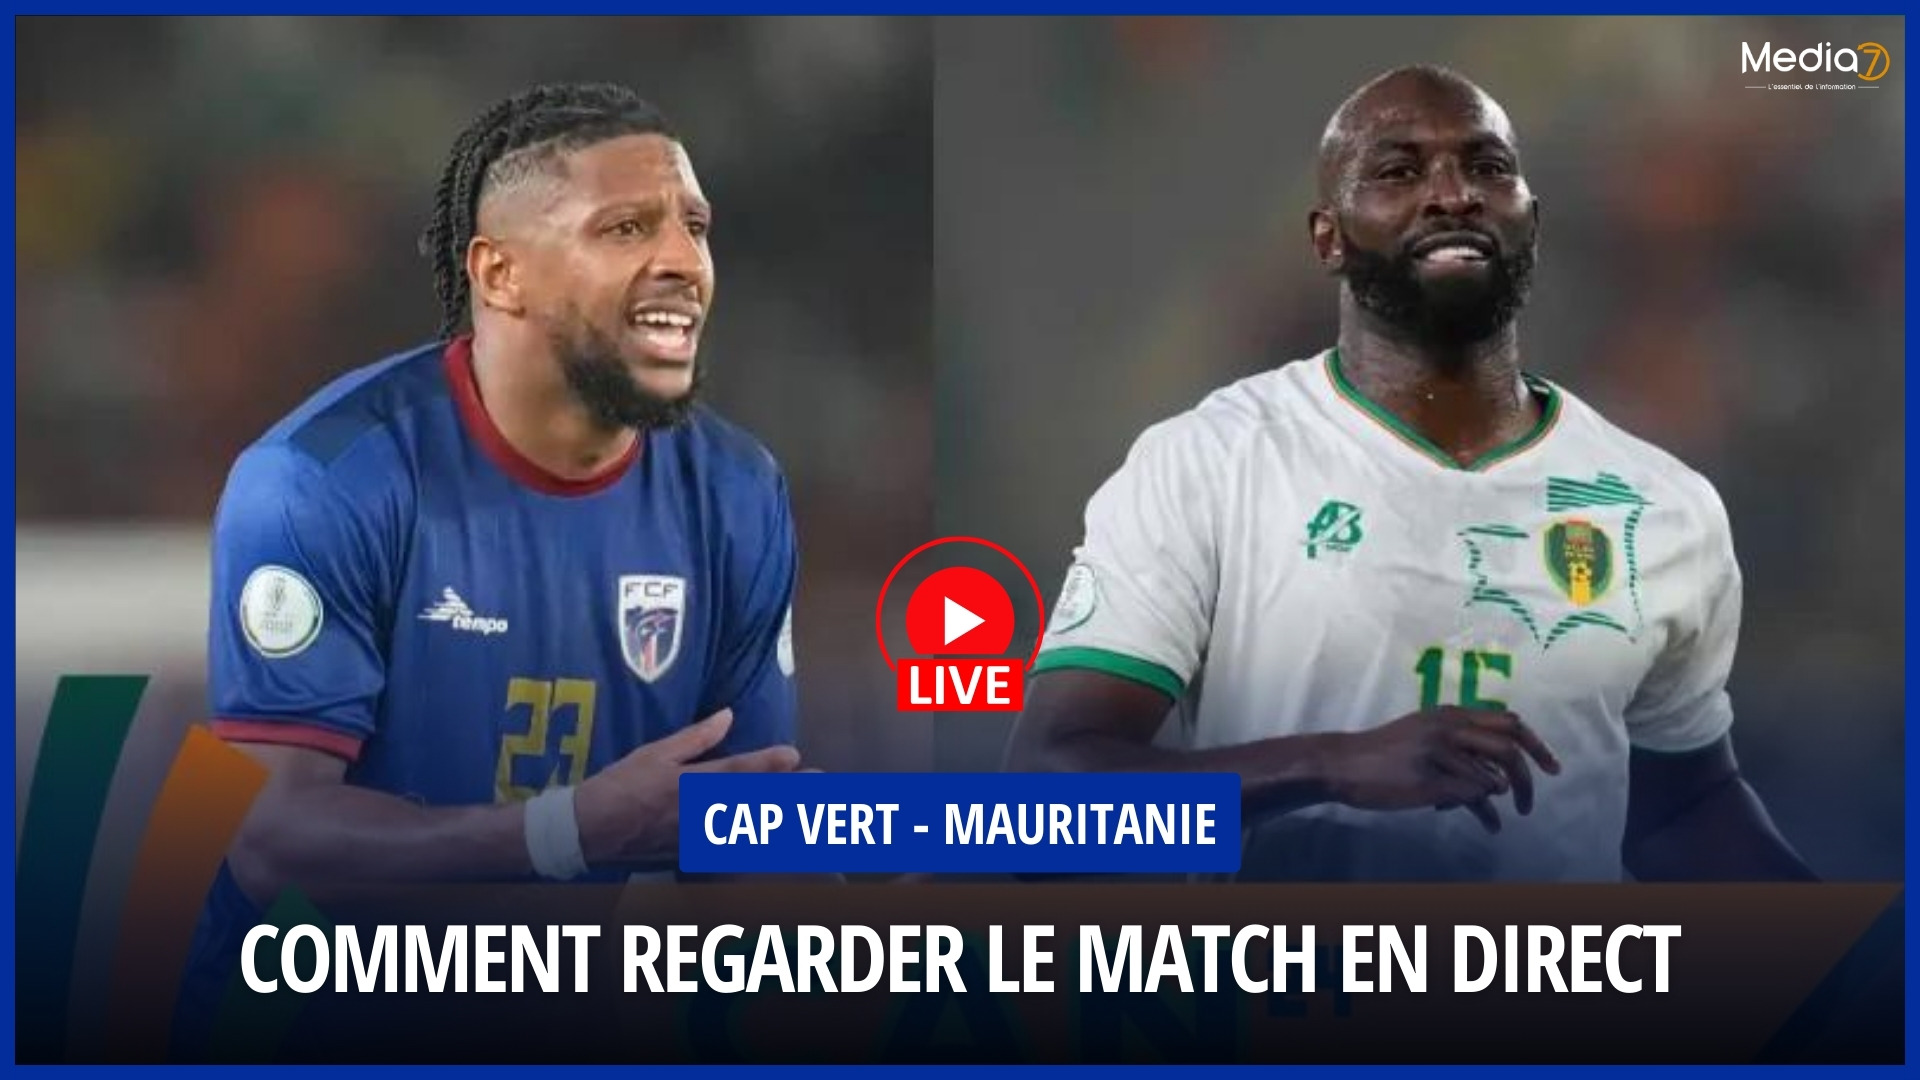 Match Cape Verde - Mauritania Live: TV Channel and Broadcast Time - Media7